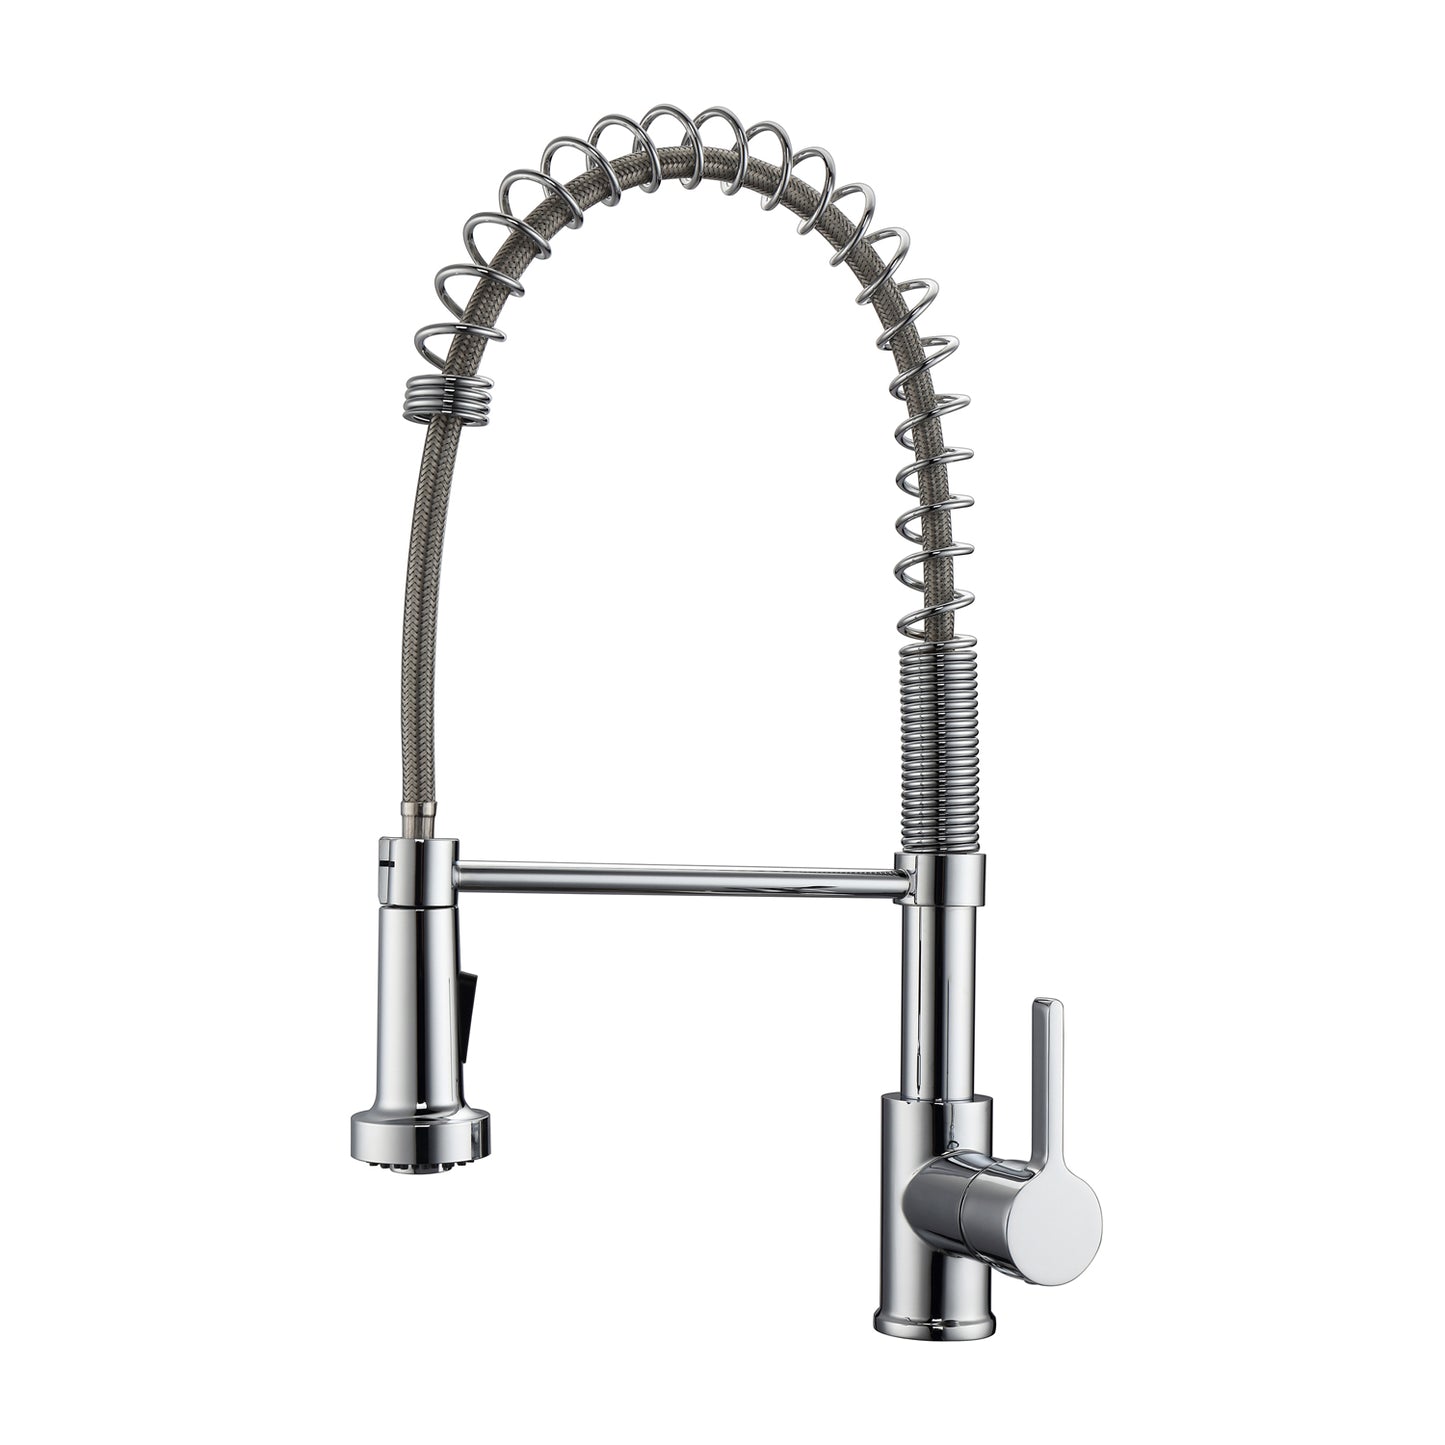 Niall 1 Kitchen Faucet, Spring, Pull-out Sprayer, Lever Handle, Chrome